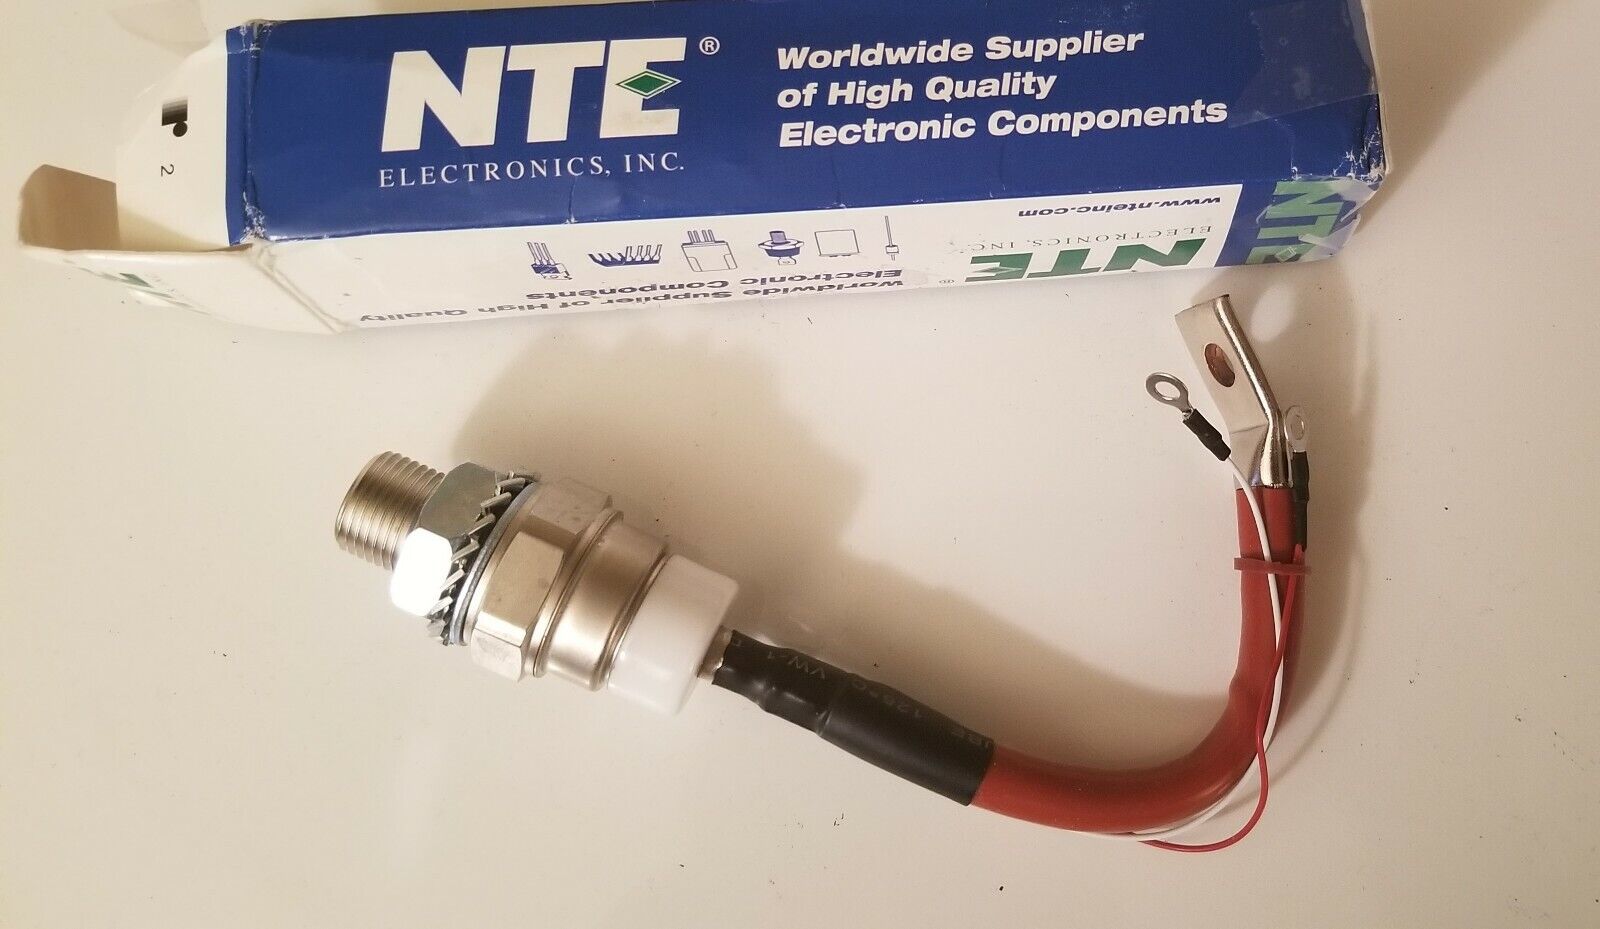 NTE 5375 Silicon Controlled Rectifier(SCR),1200V 275Amp HI SPEED Switching,TO-93